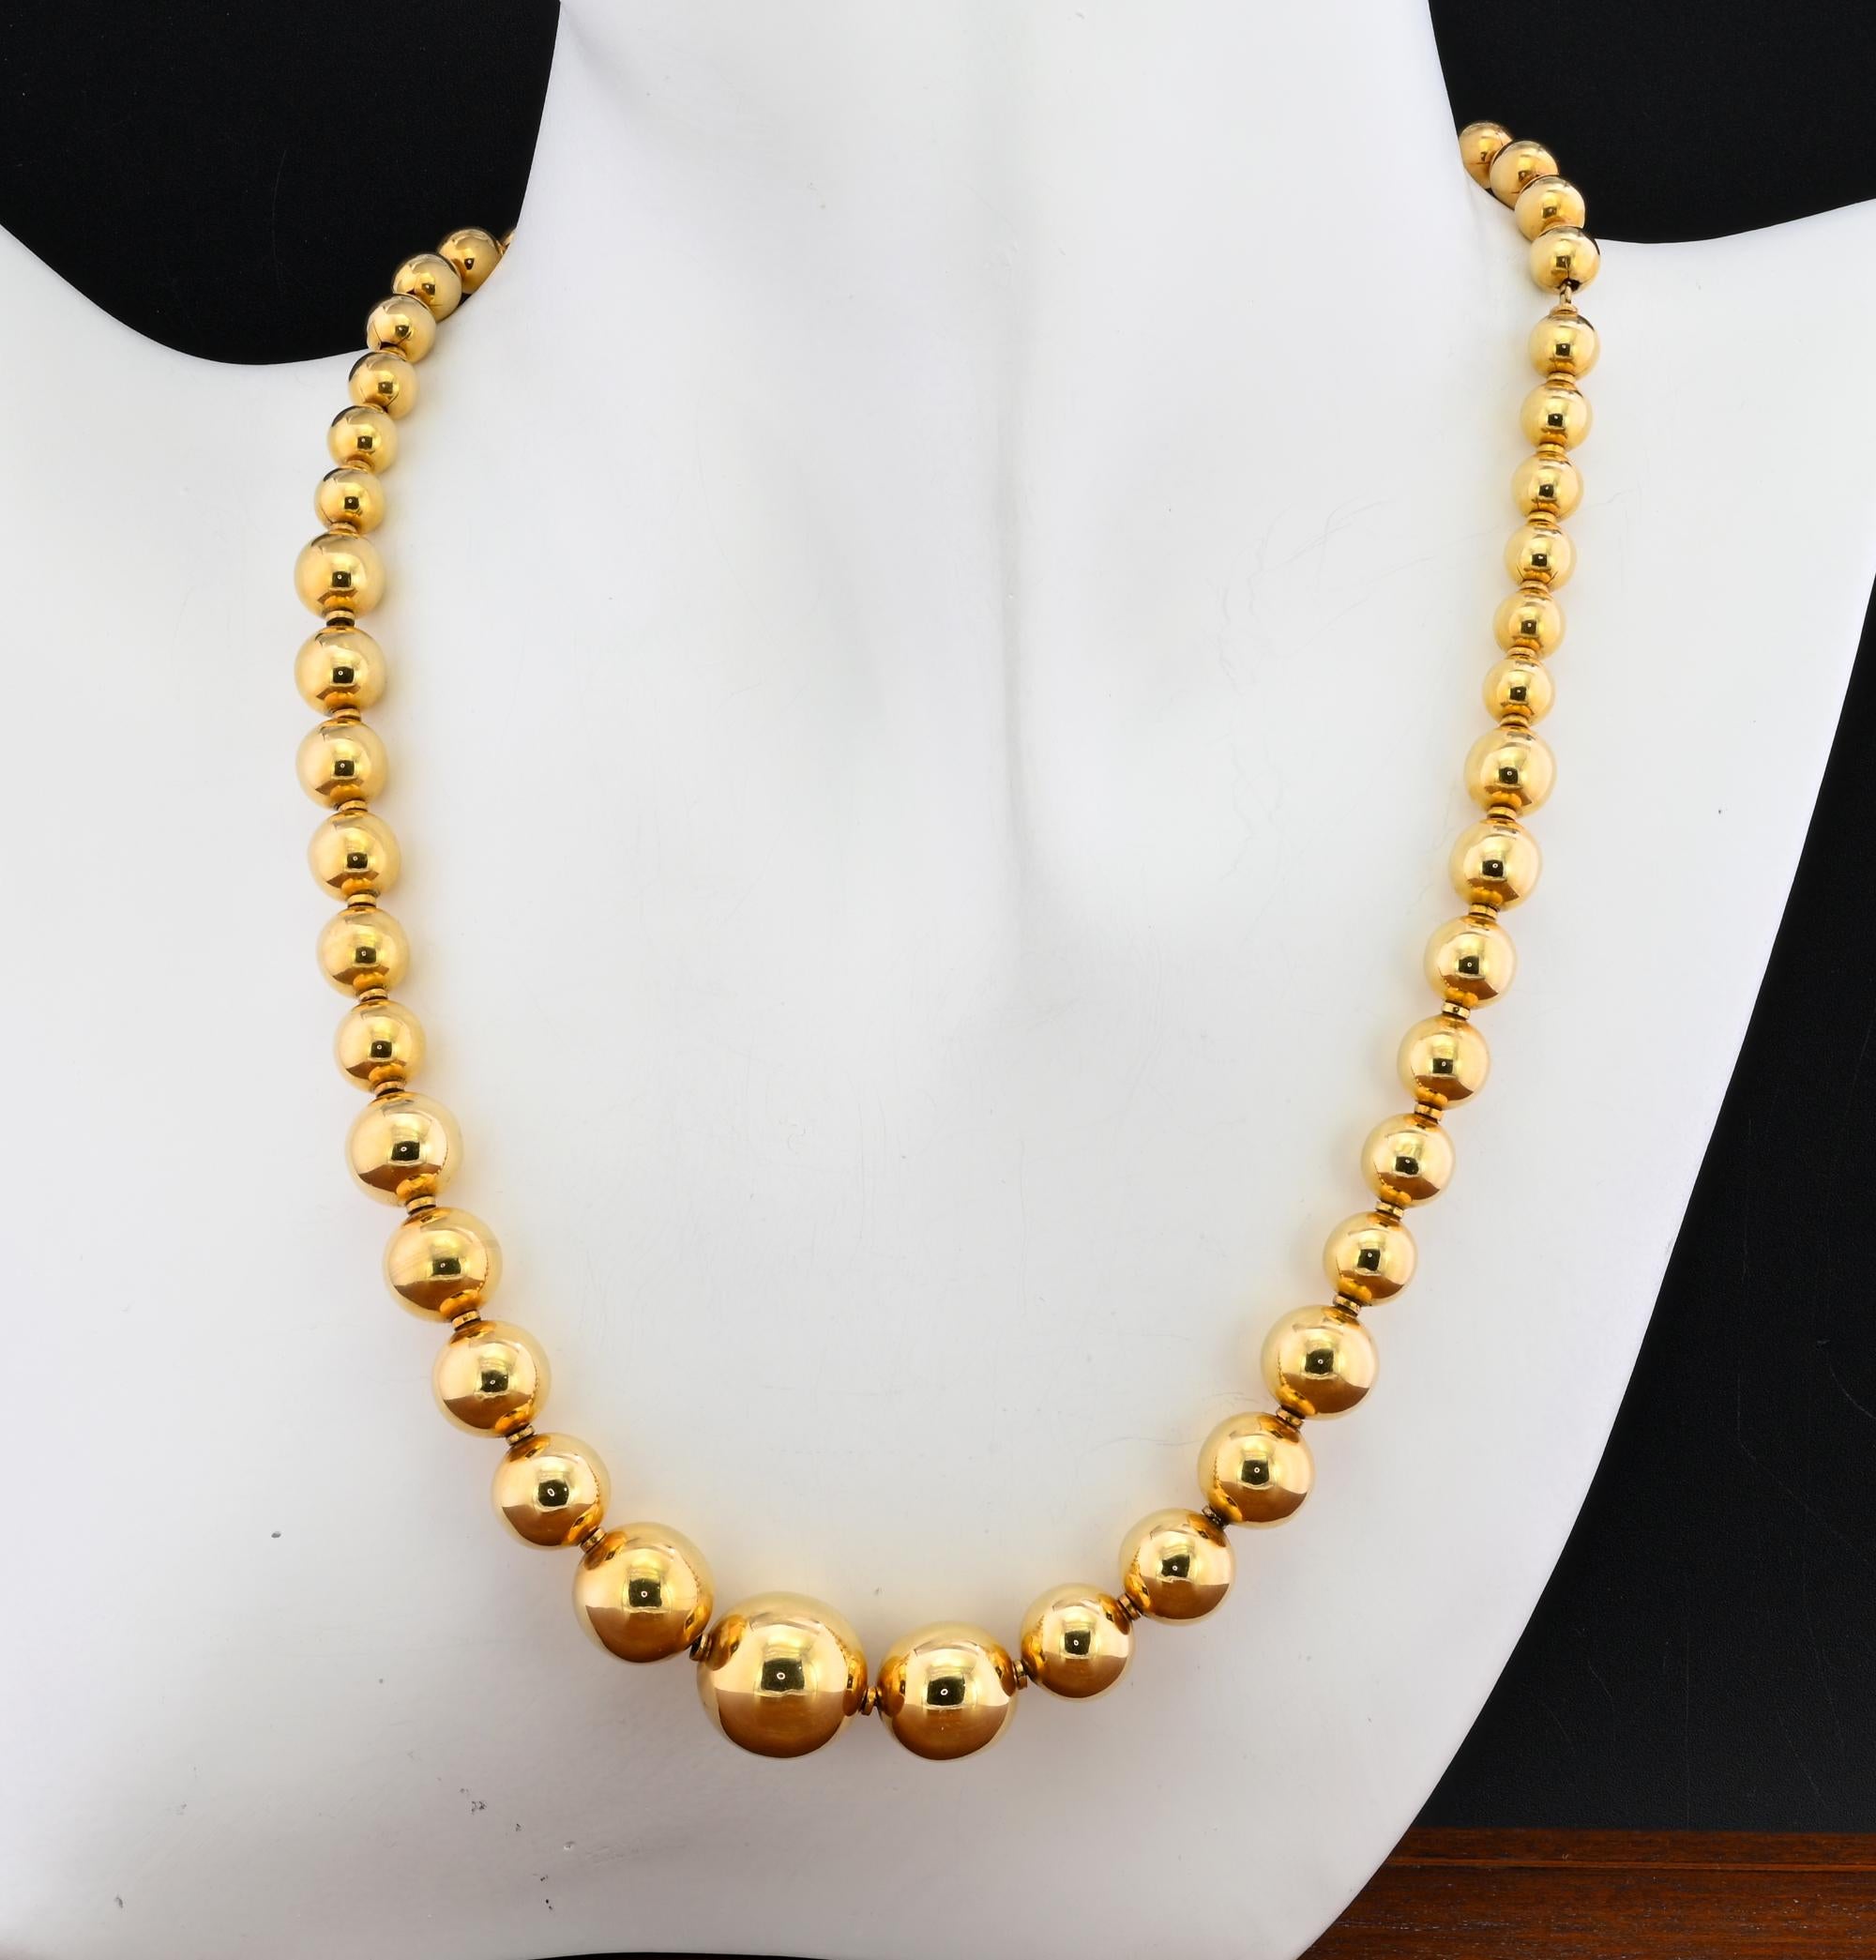 Simply exquisite vintage necklace 1945 circa, Italian origin
Beautifully hand crafted of solid 18 Kt gold, weighs 45 grams
Made by a composition of gold beads graduating from 14 mm. the biggest going down to 6.5 mm the smallest with closure